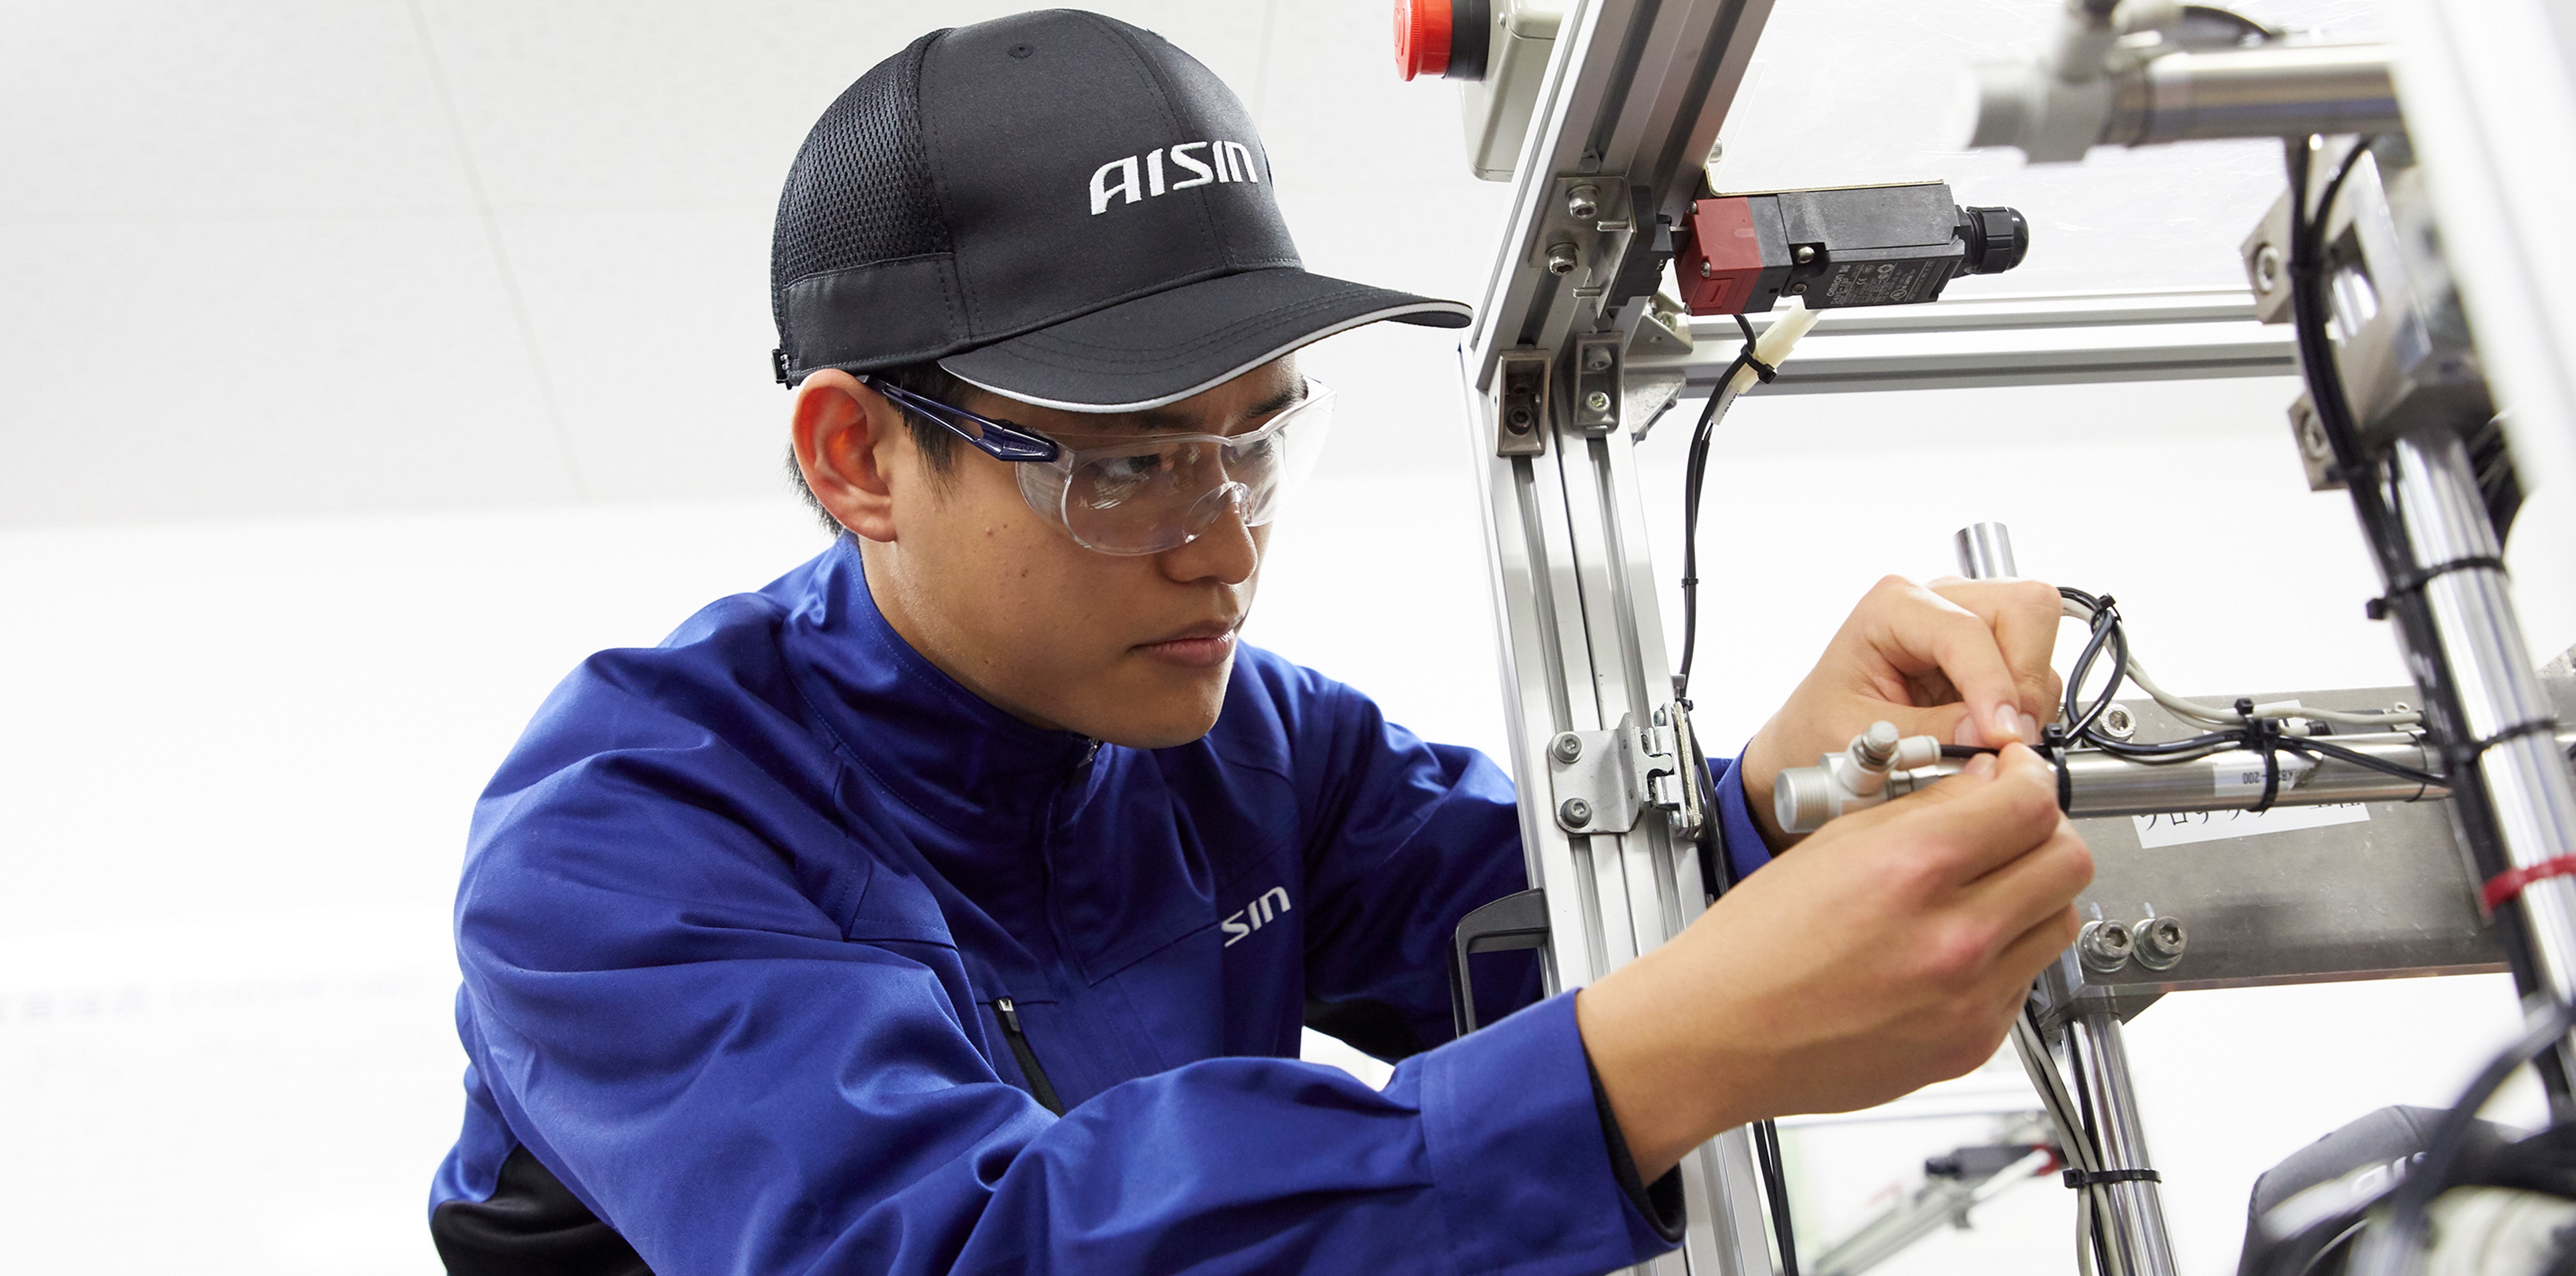 Aisin Academy--Fostering globally competent next-generation leaders in manufacturing